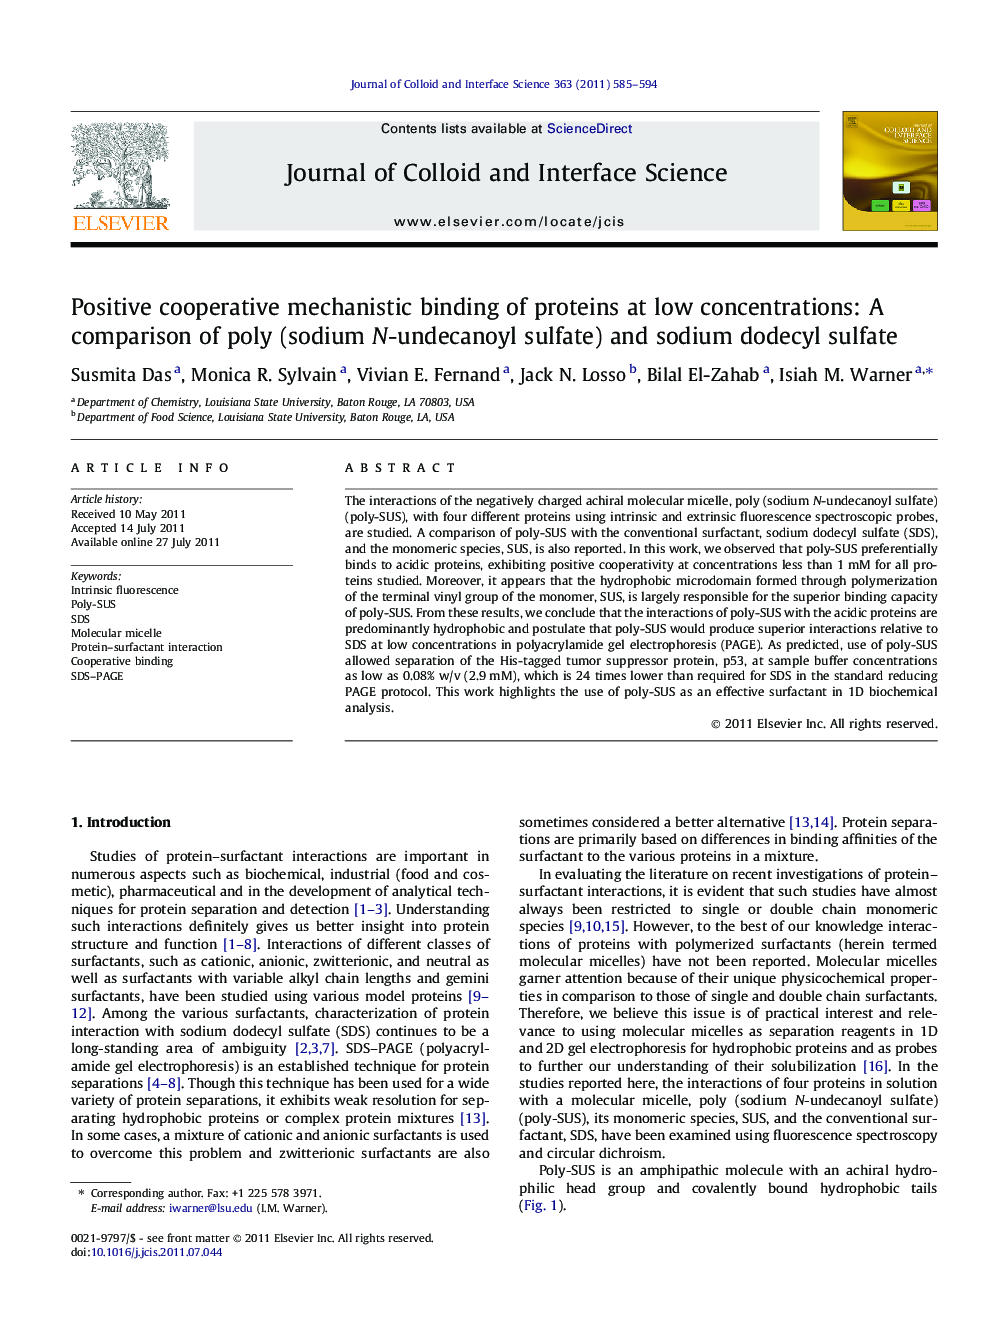 Positive cooperative mechanistic binding of proteins at low concentrations: A comparison of poly (sodium N-undecanoyl sulfate) and sodium dodecyl sulfate